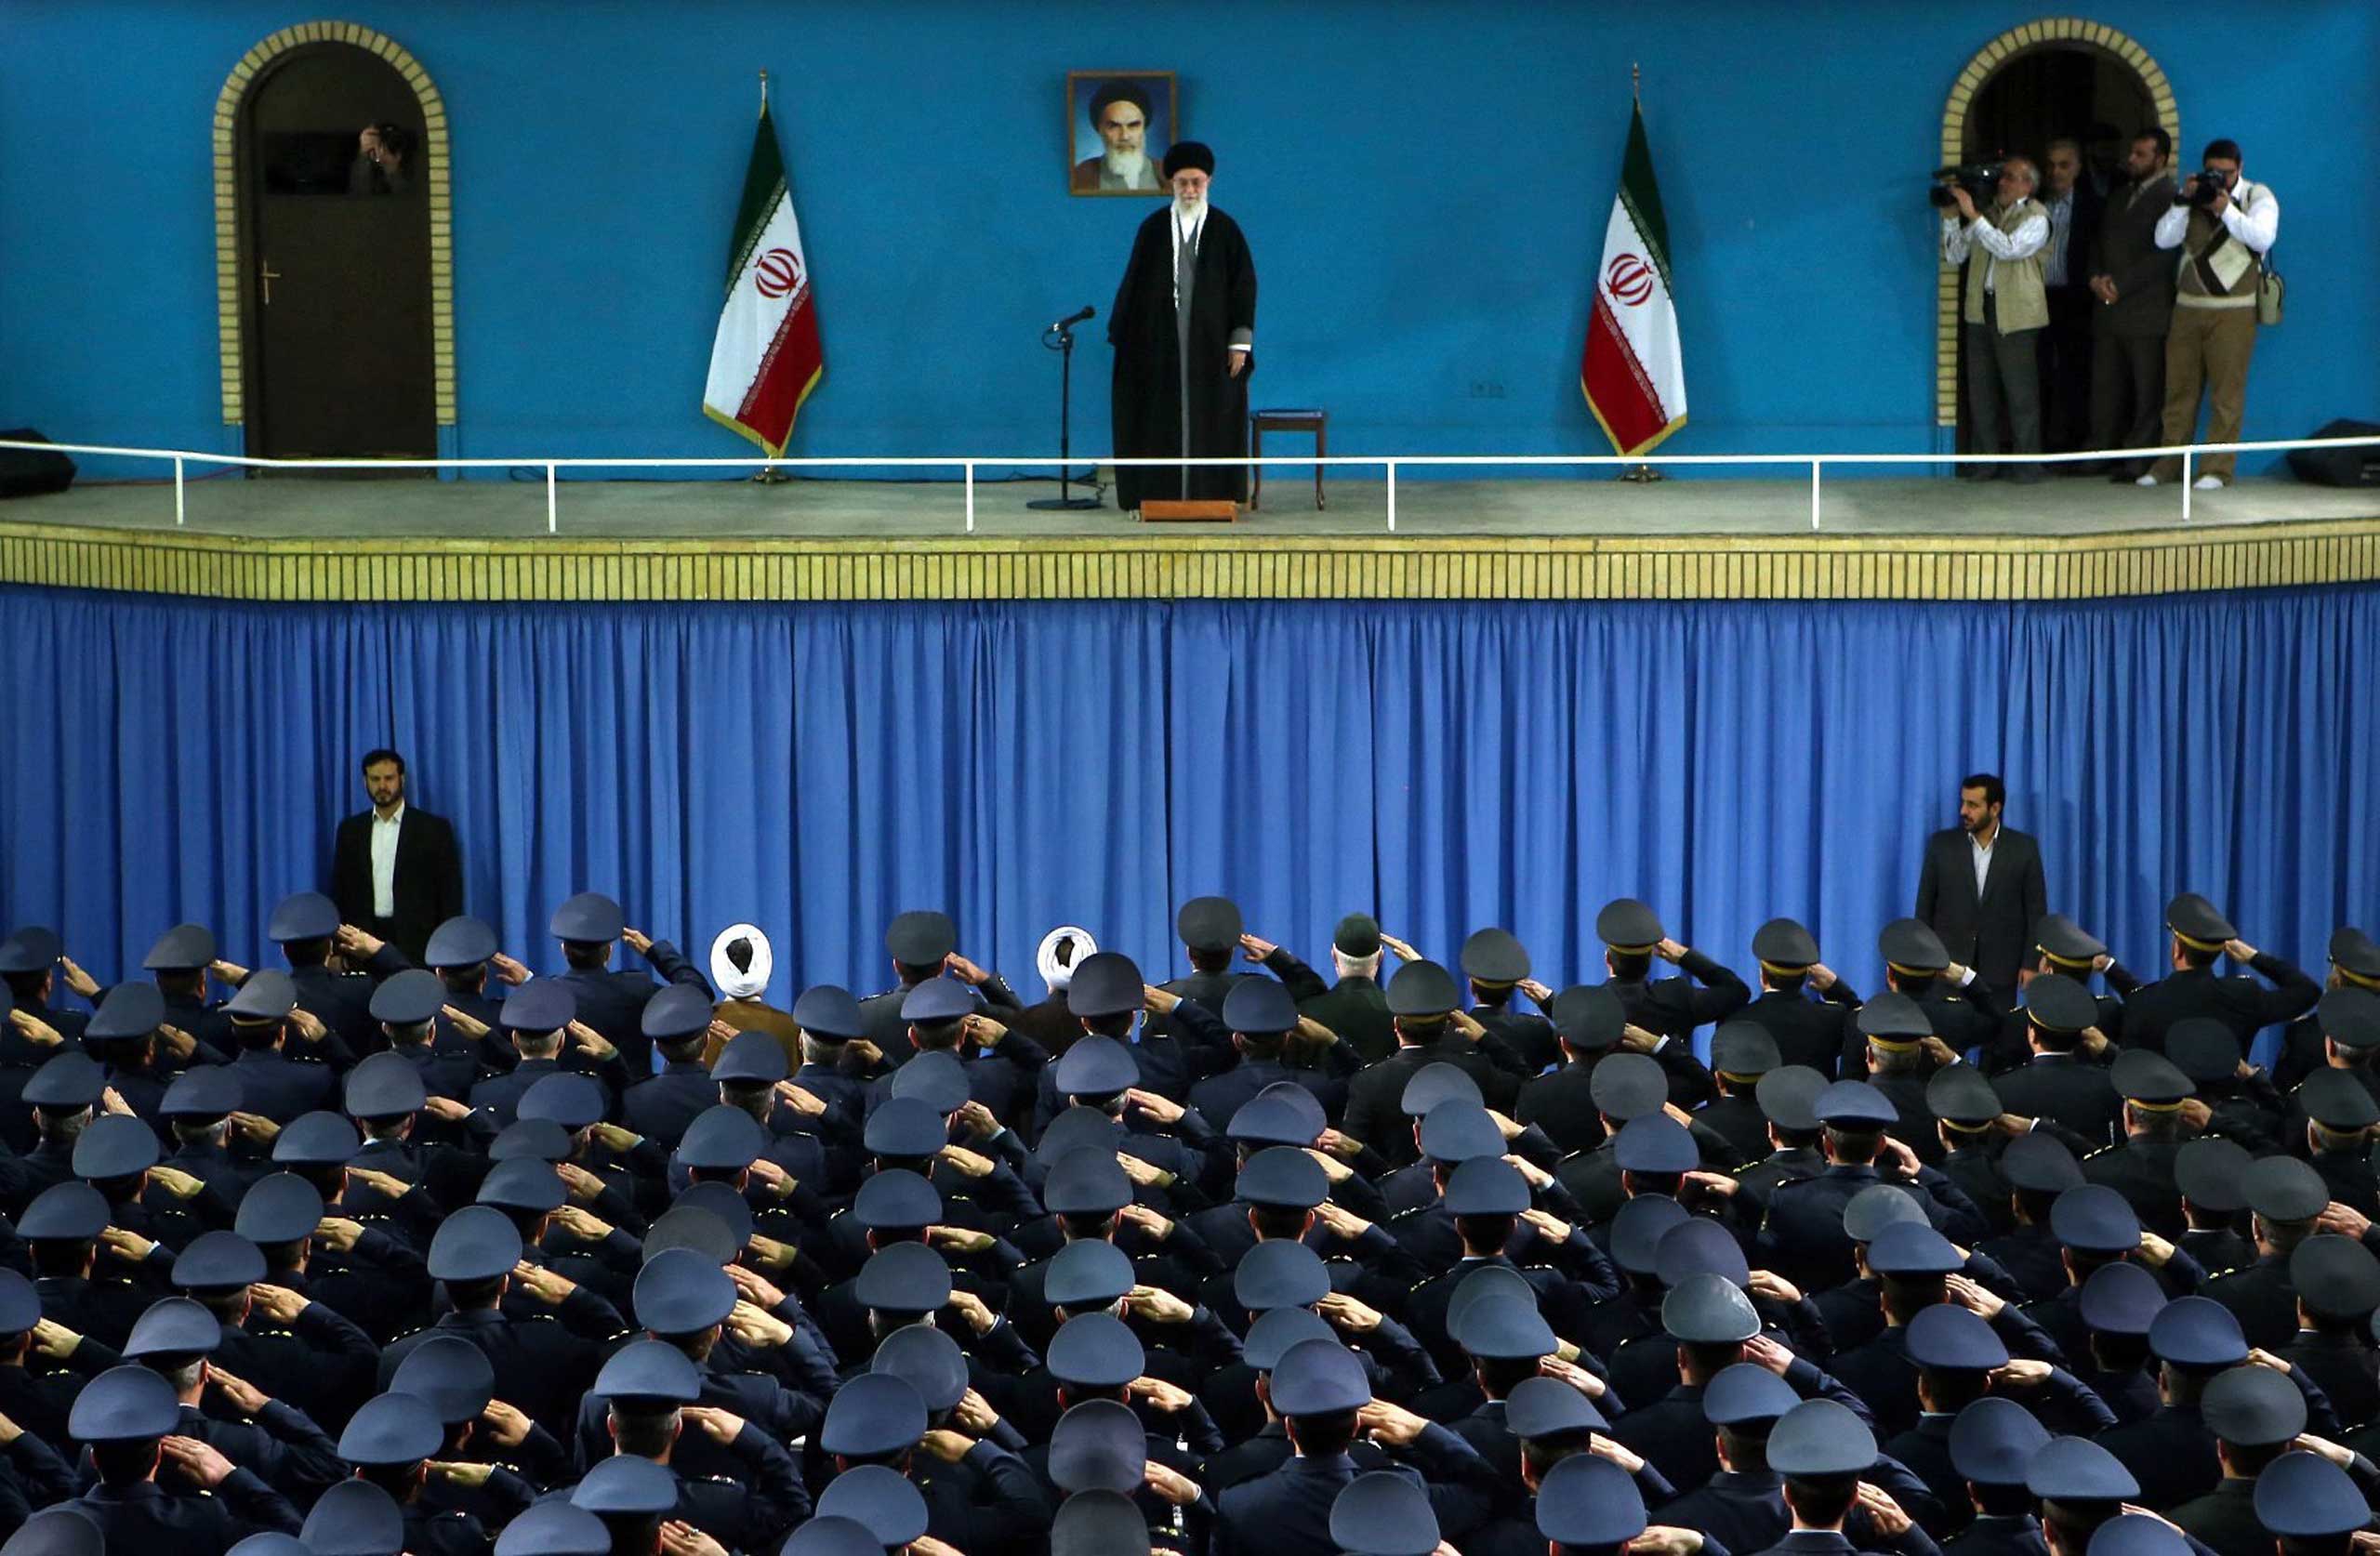 Army air force officers salute Supreme Leader Ayatollah Ali Khamenei during a ceremony in Tehran, Feb. 8, 2015. (Supreme Leader Official website/EPA)